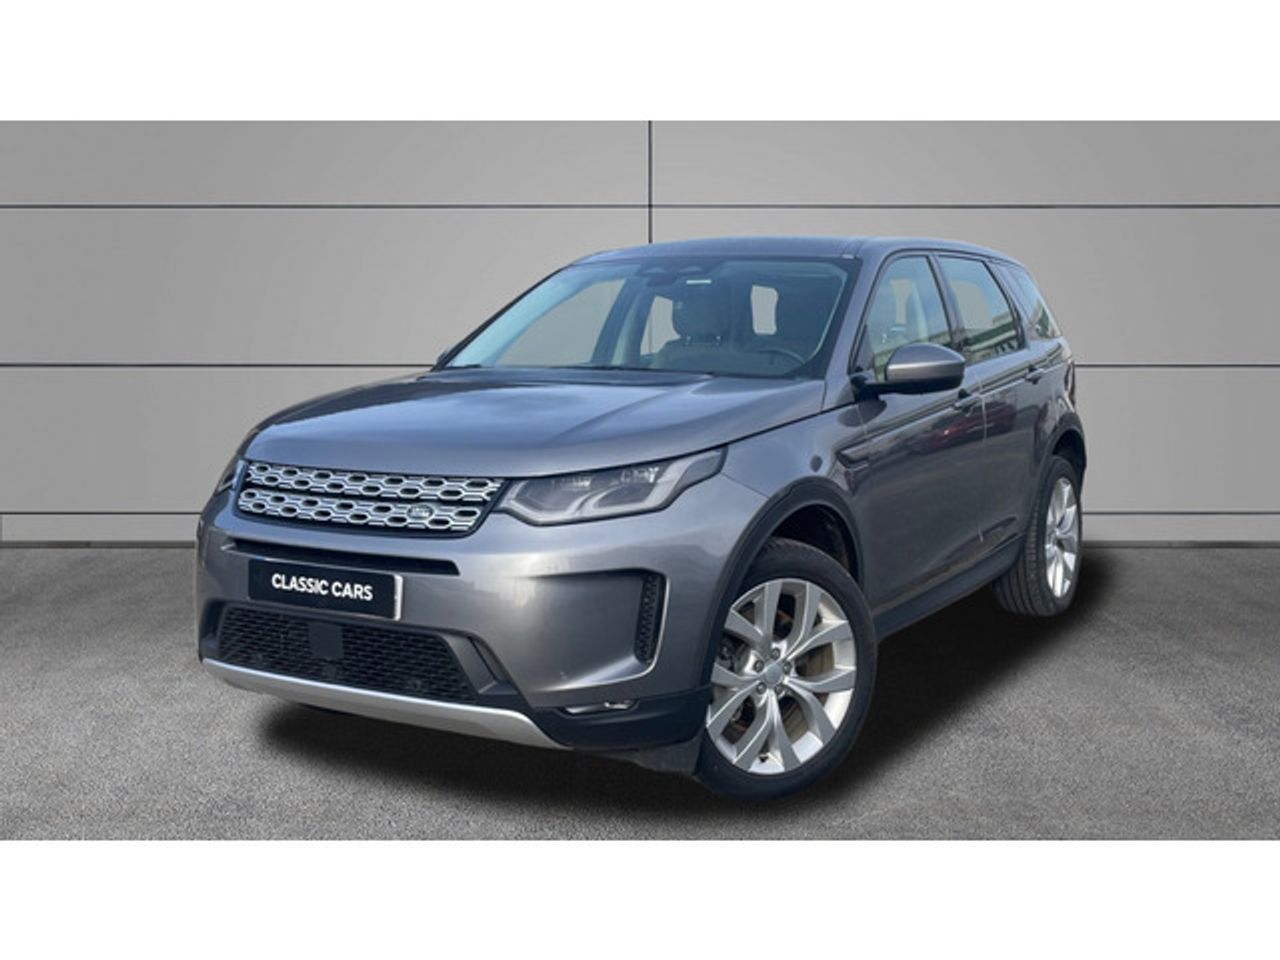 Land-rover discovery sport 2.0d td4 mhev se awd auto 120 kw (163 cv)